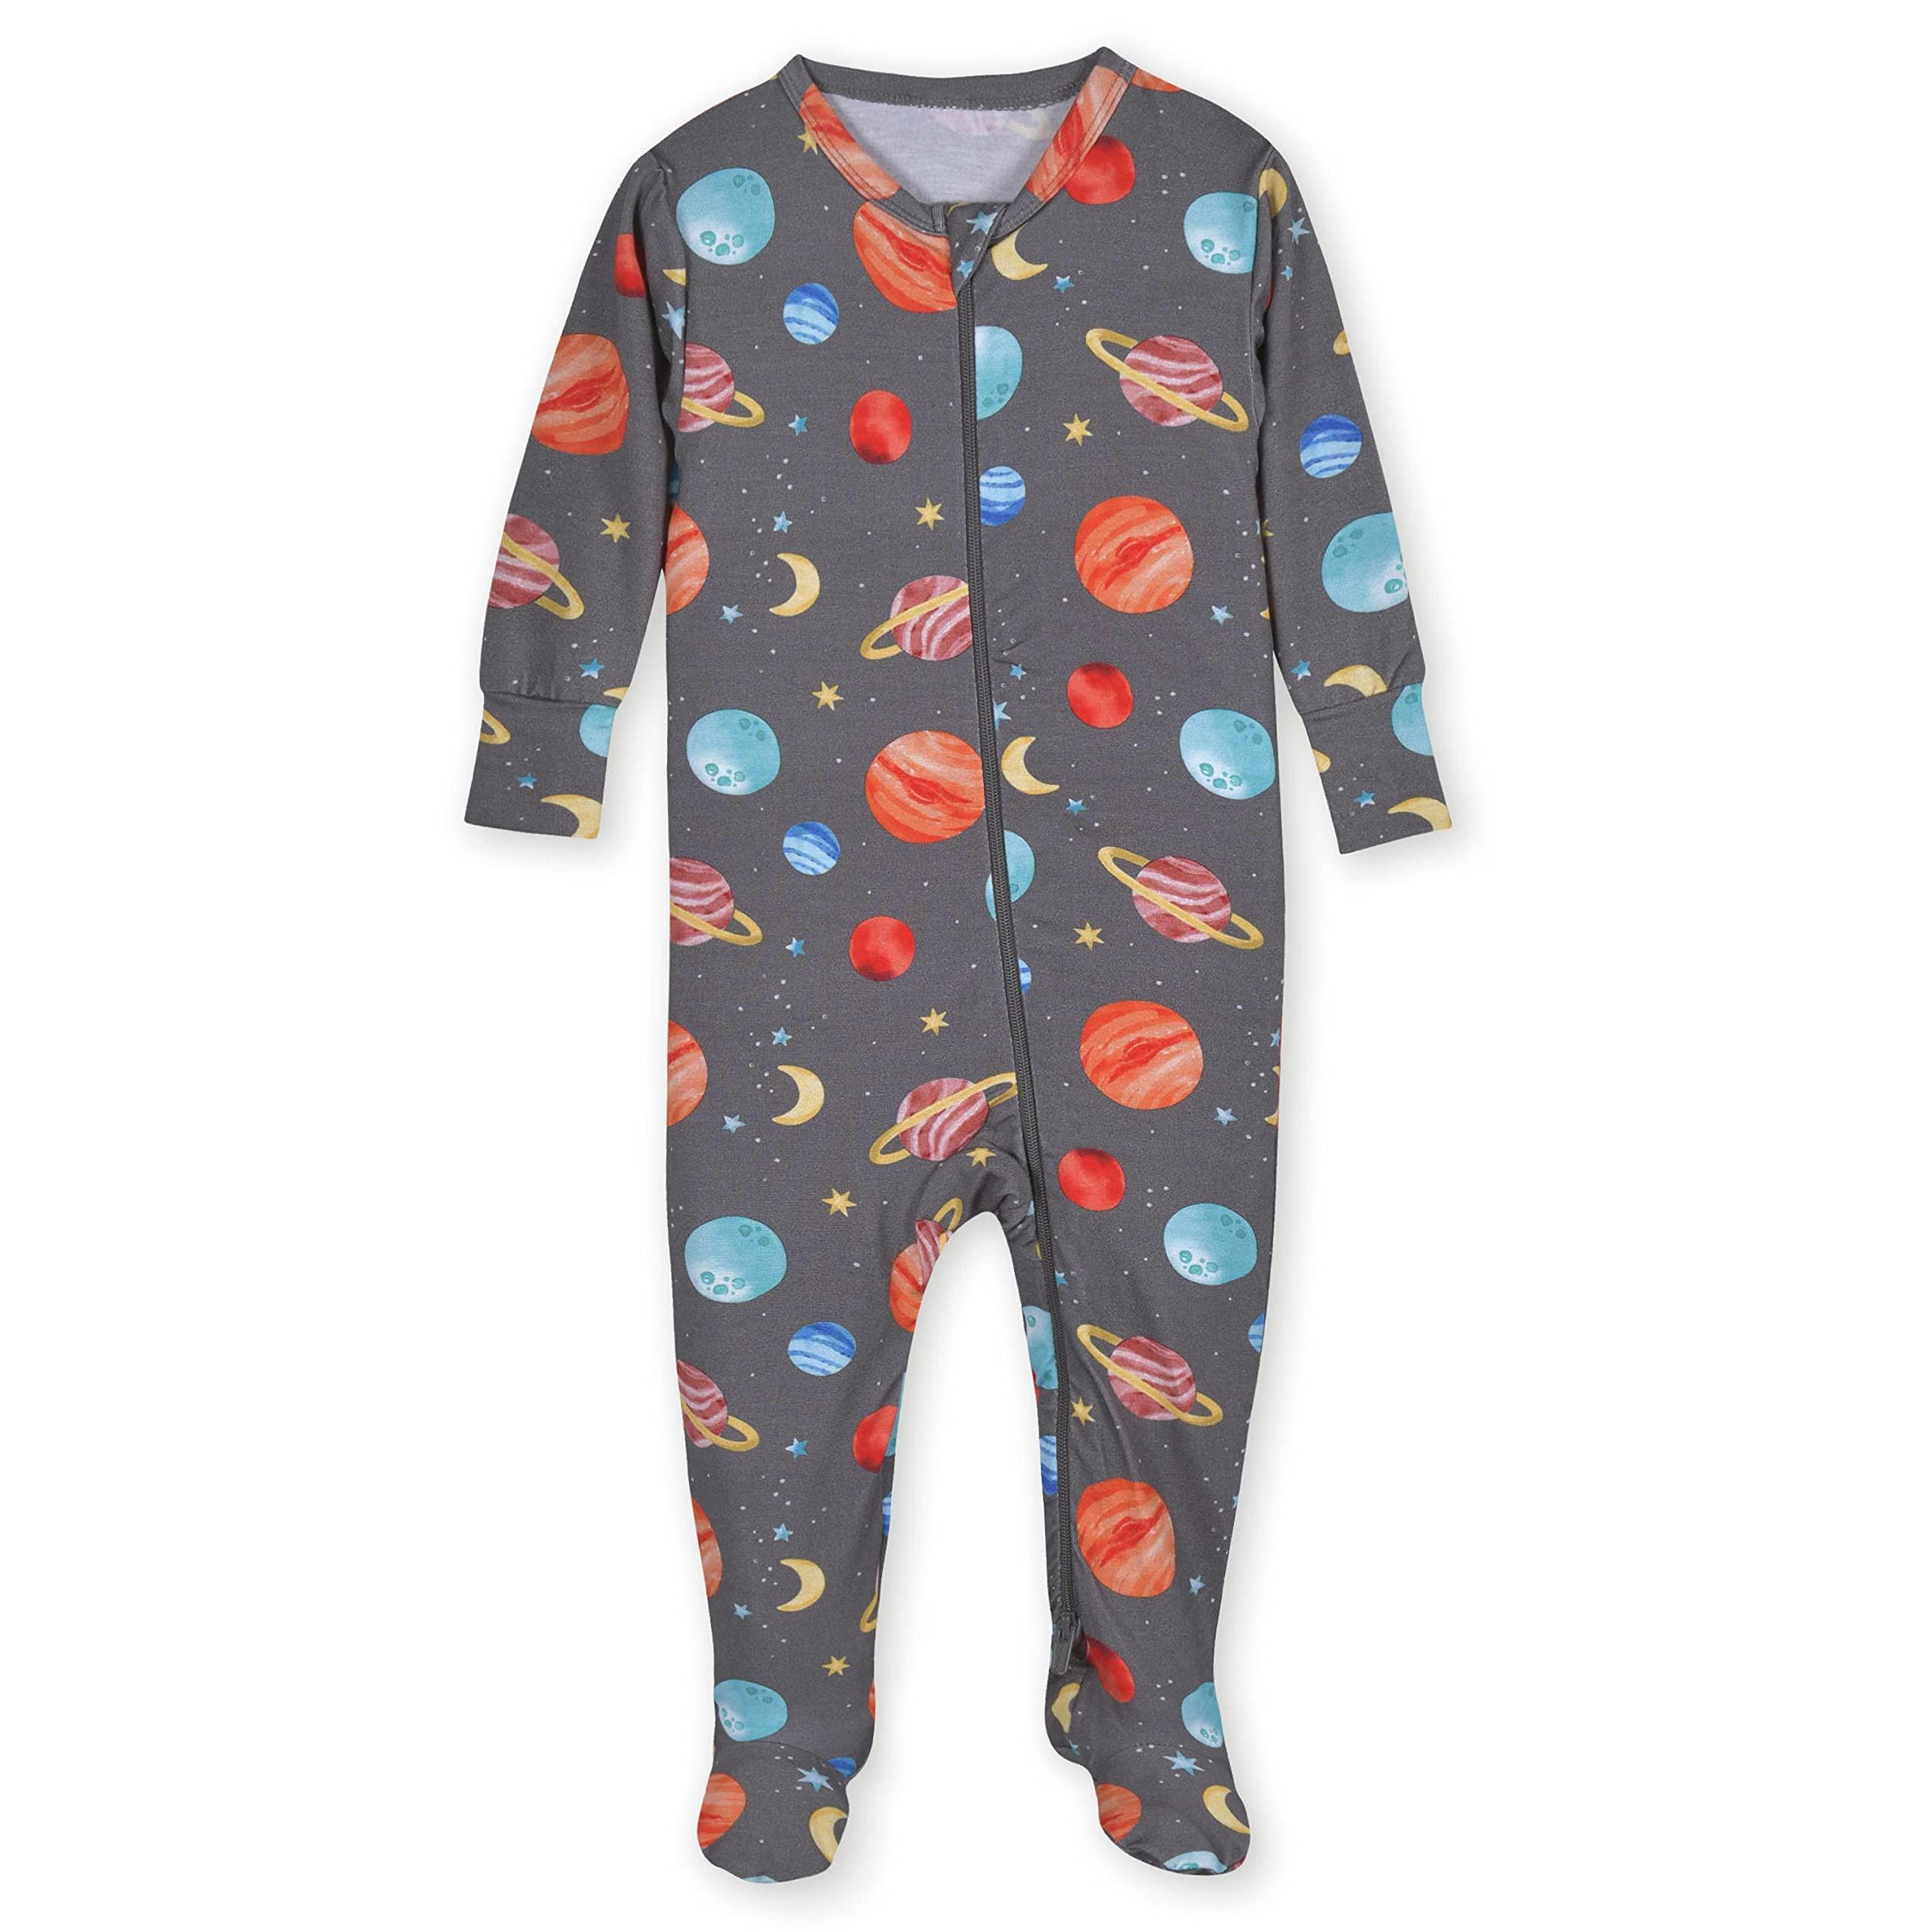 Gerber Unisex Baby Toddler Buttery Soft Snug Fit Footed Pajamas With  Viscose Made From Eucalyptus, Space, 0-3 Months